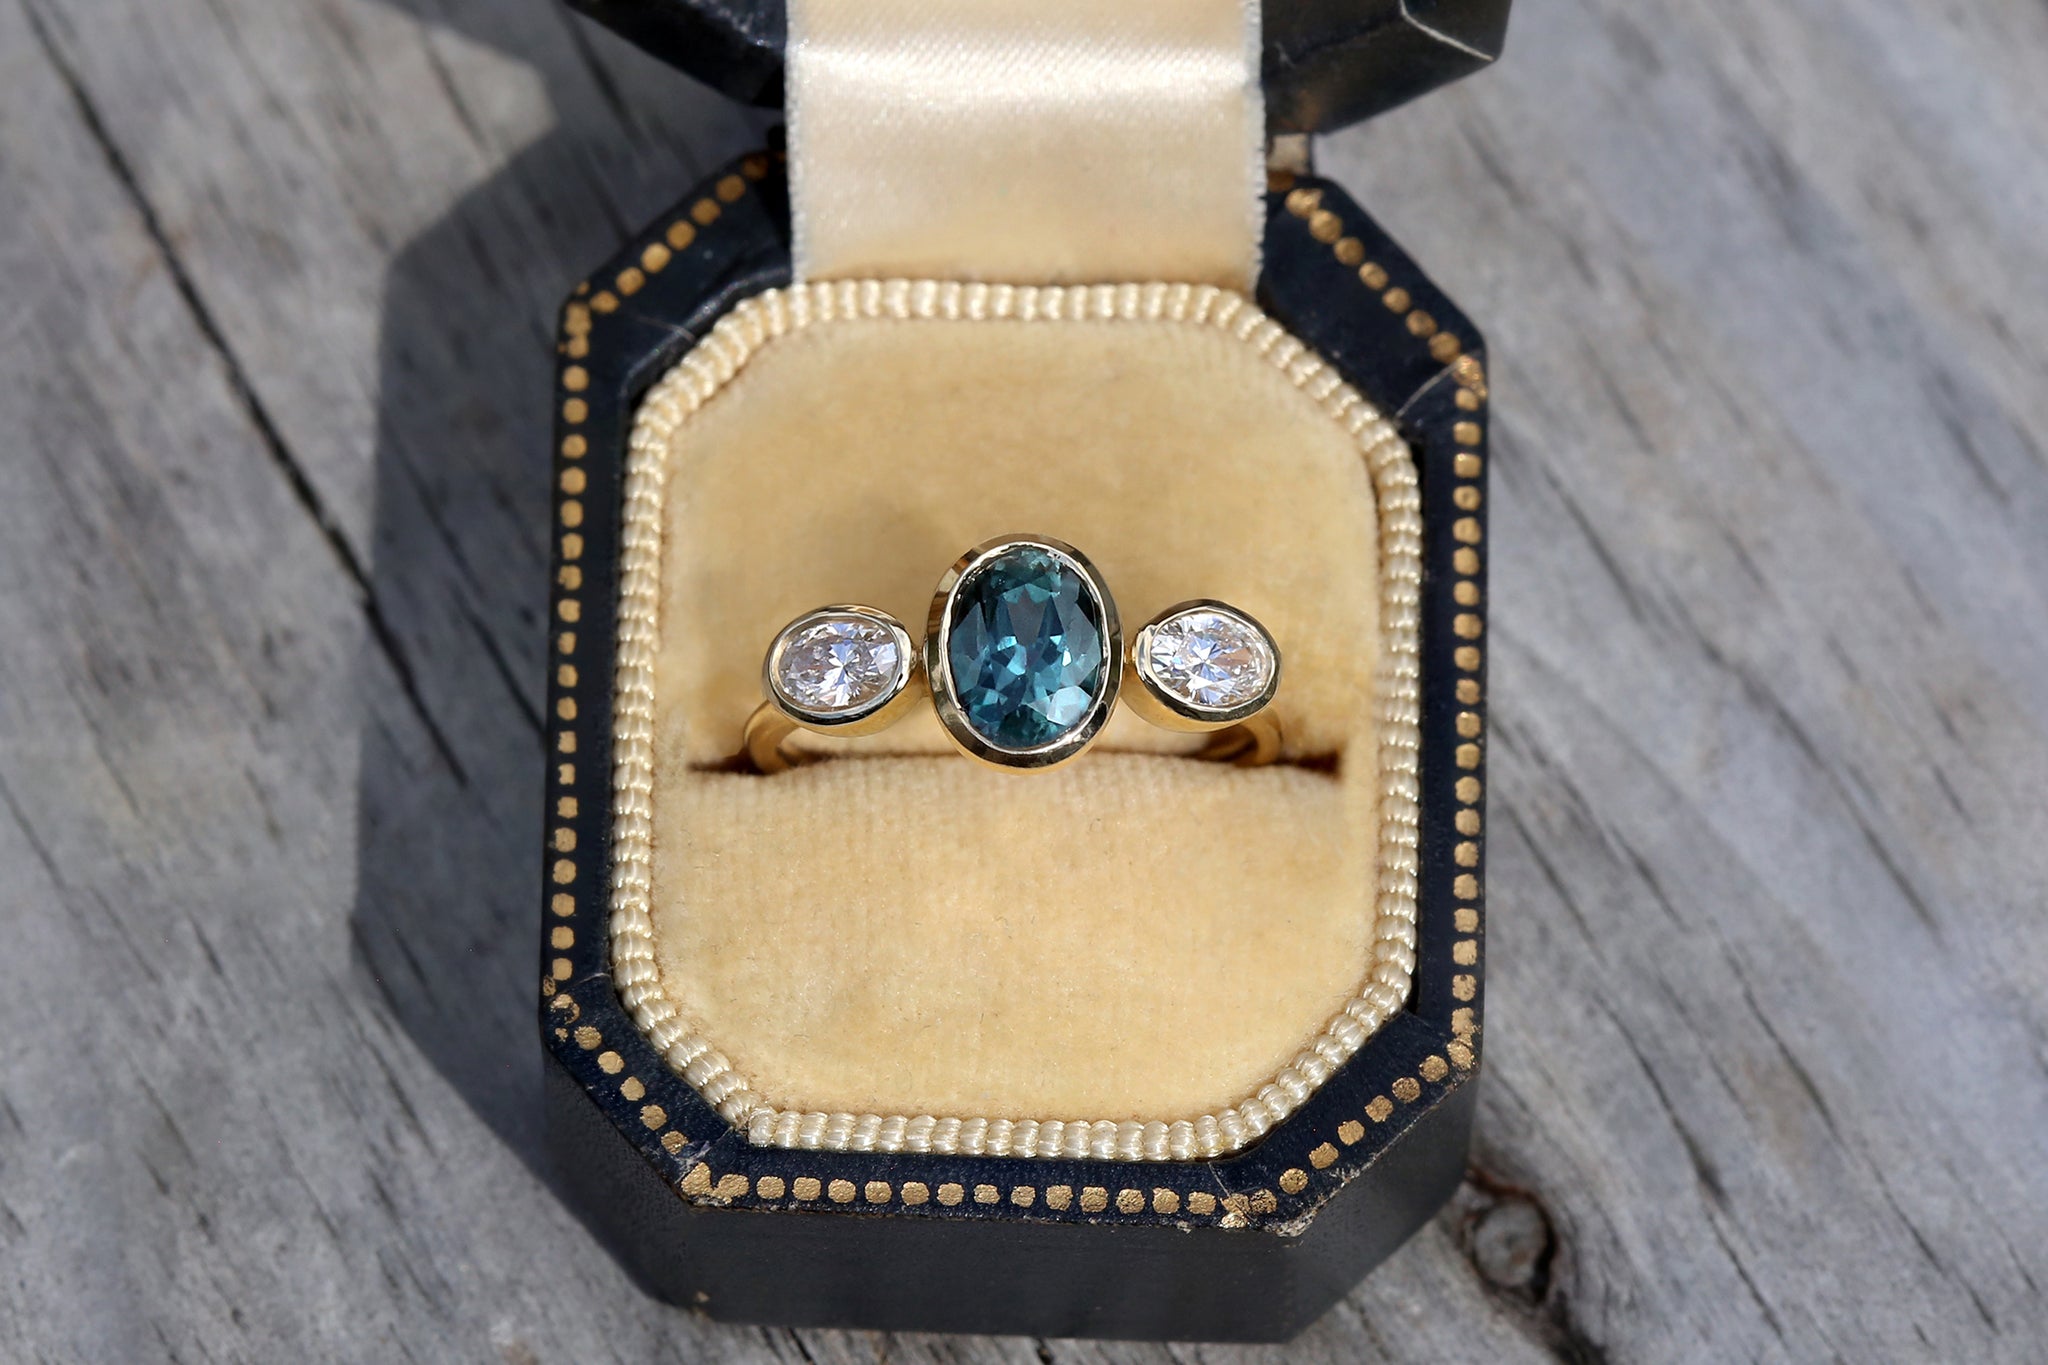 Teal American Treasure Oval Trio Ring - S. Kind & Co